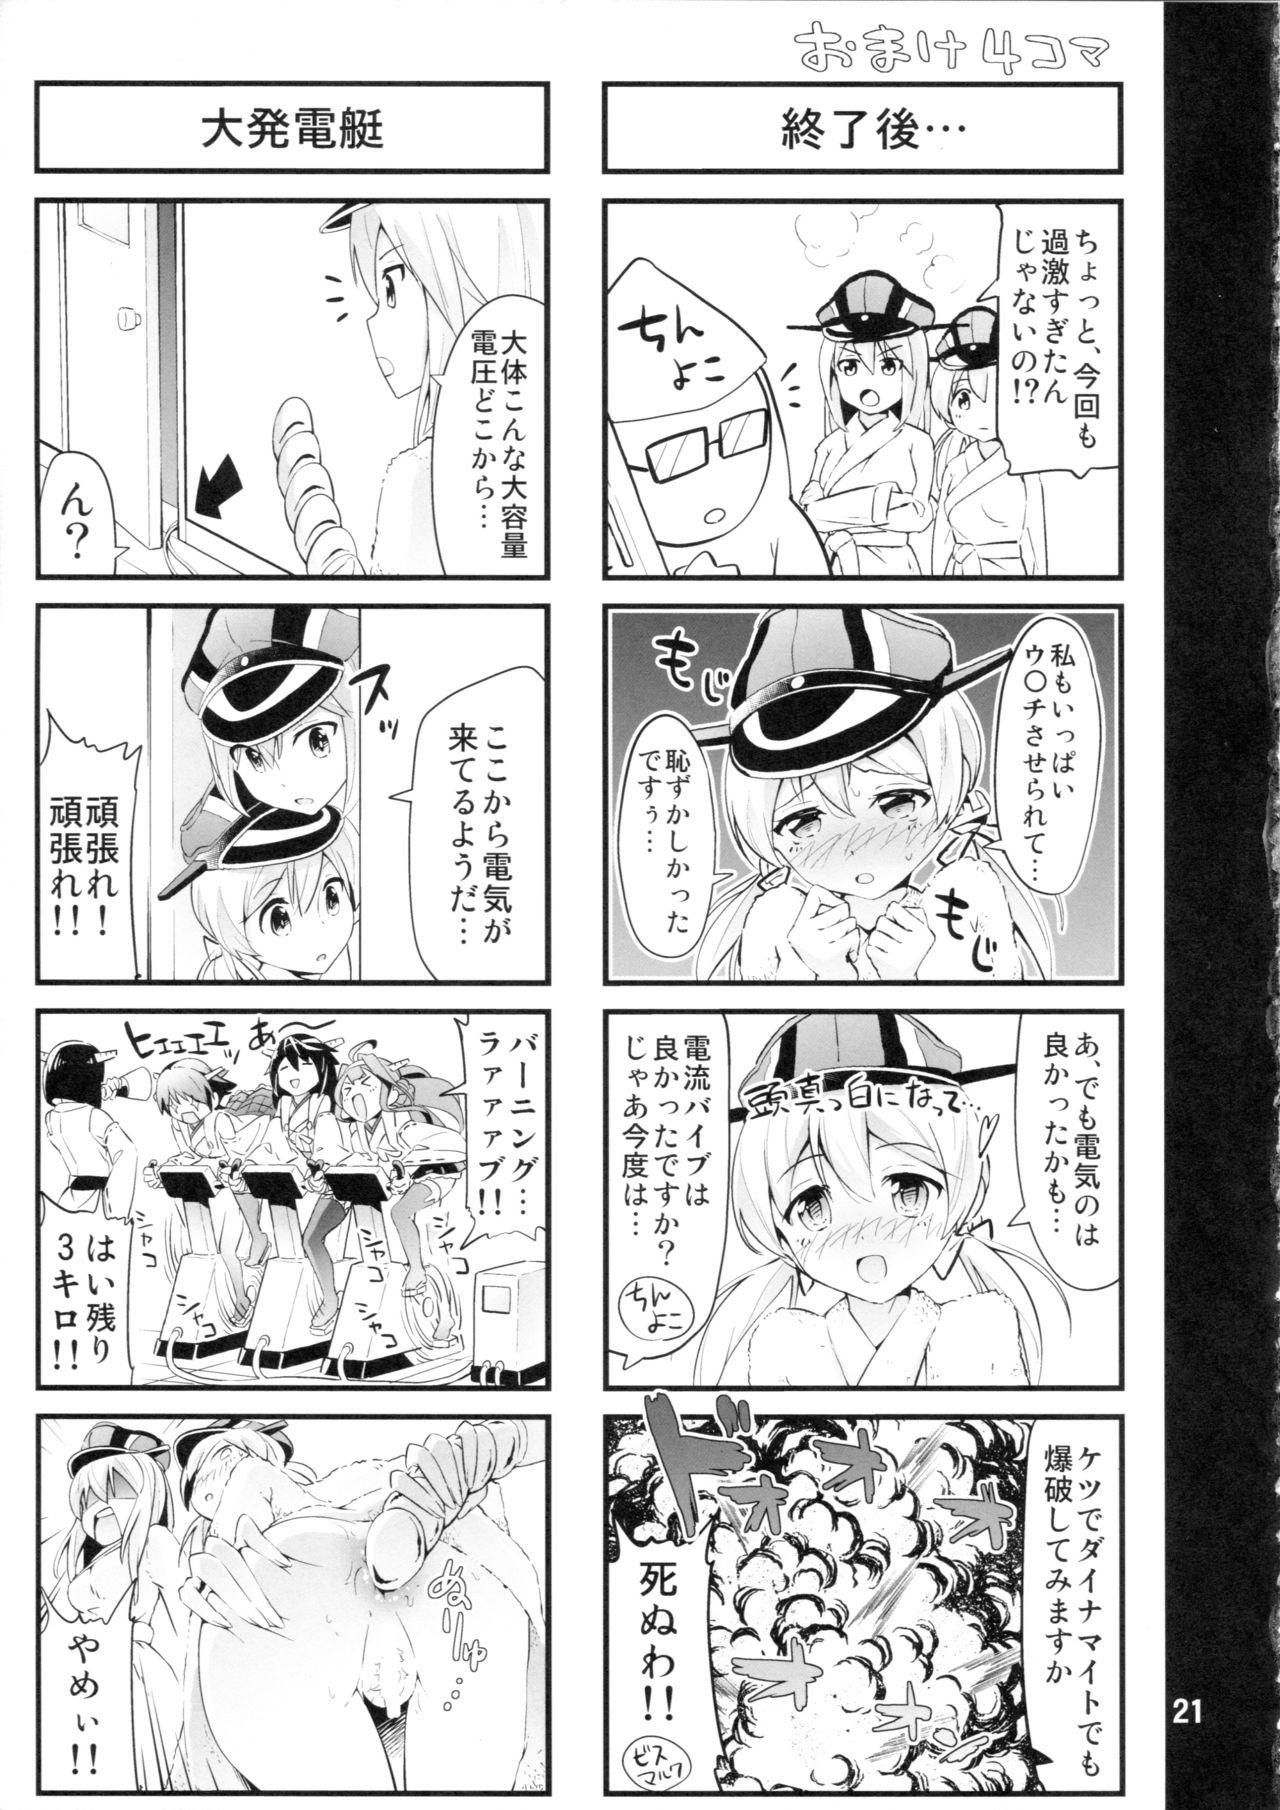 Internal ICE WORK 4 - Kantai collection Relax - Page 20